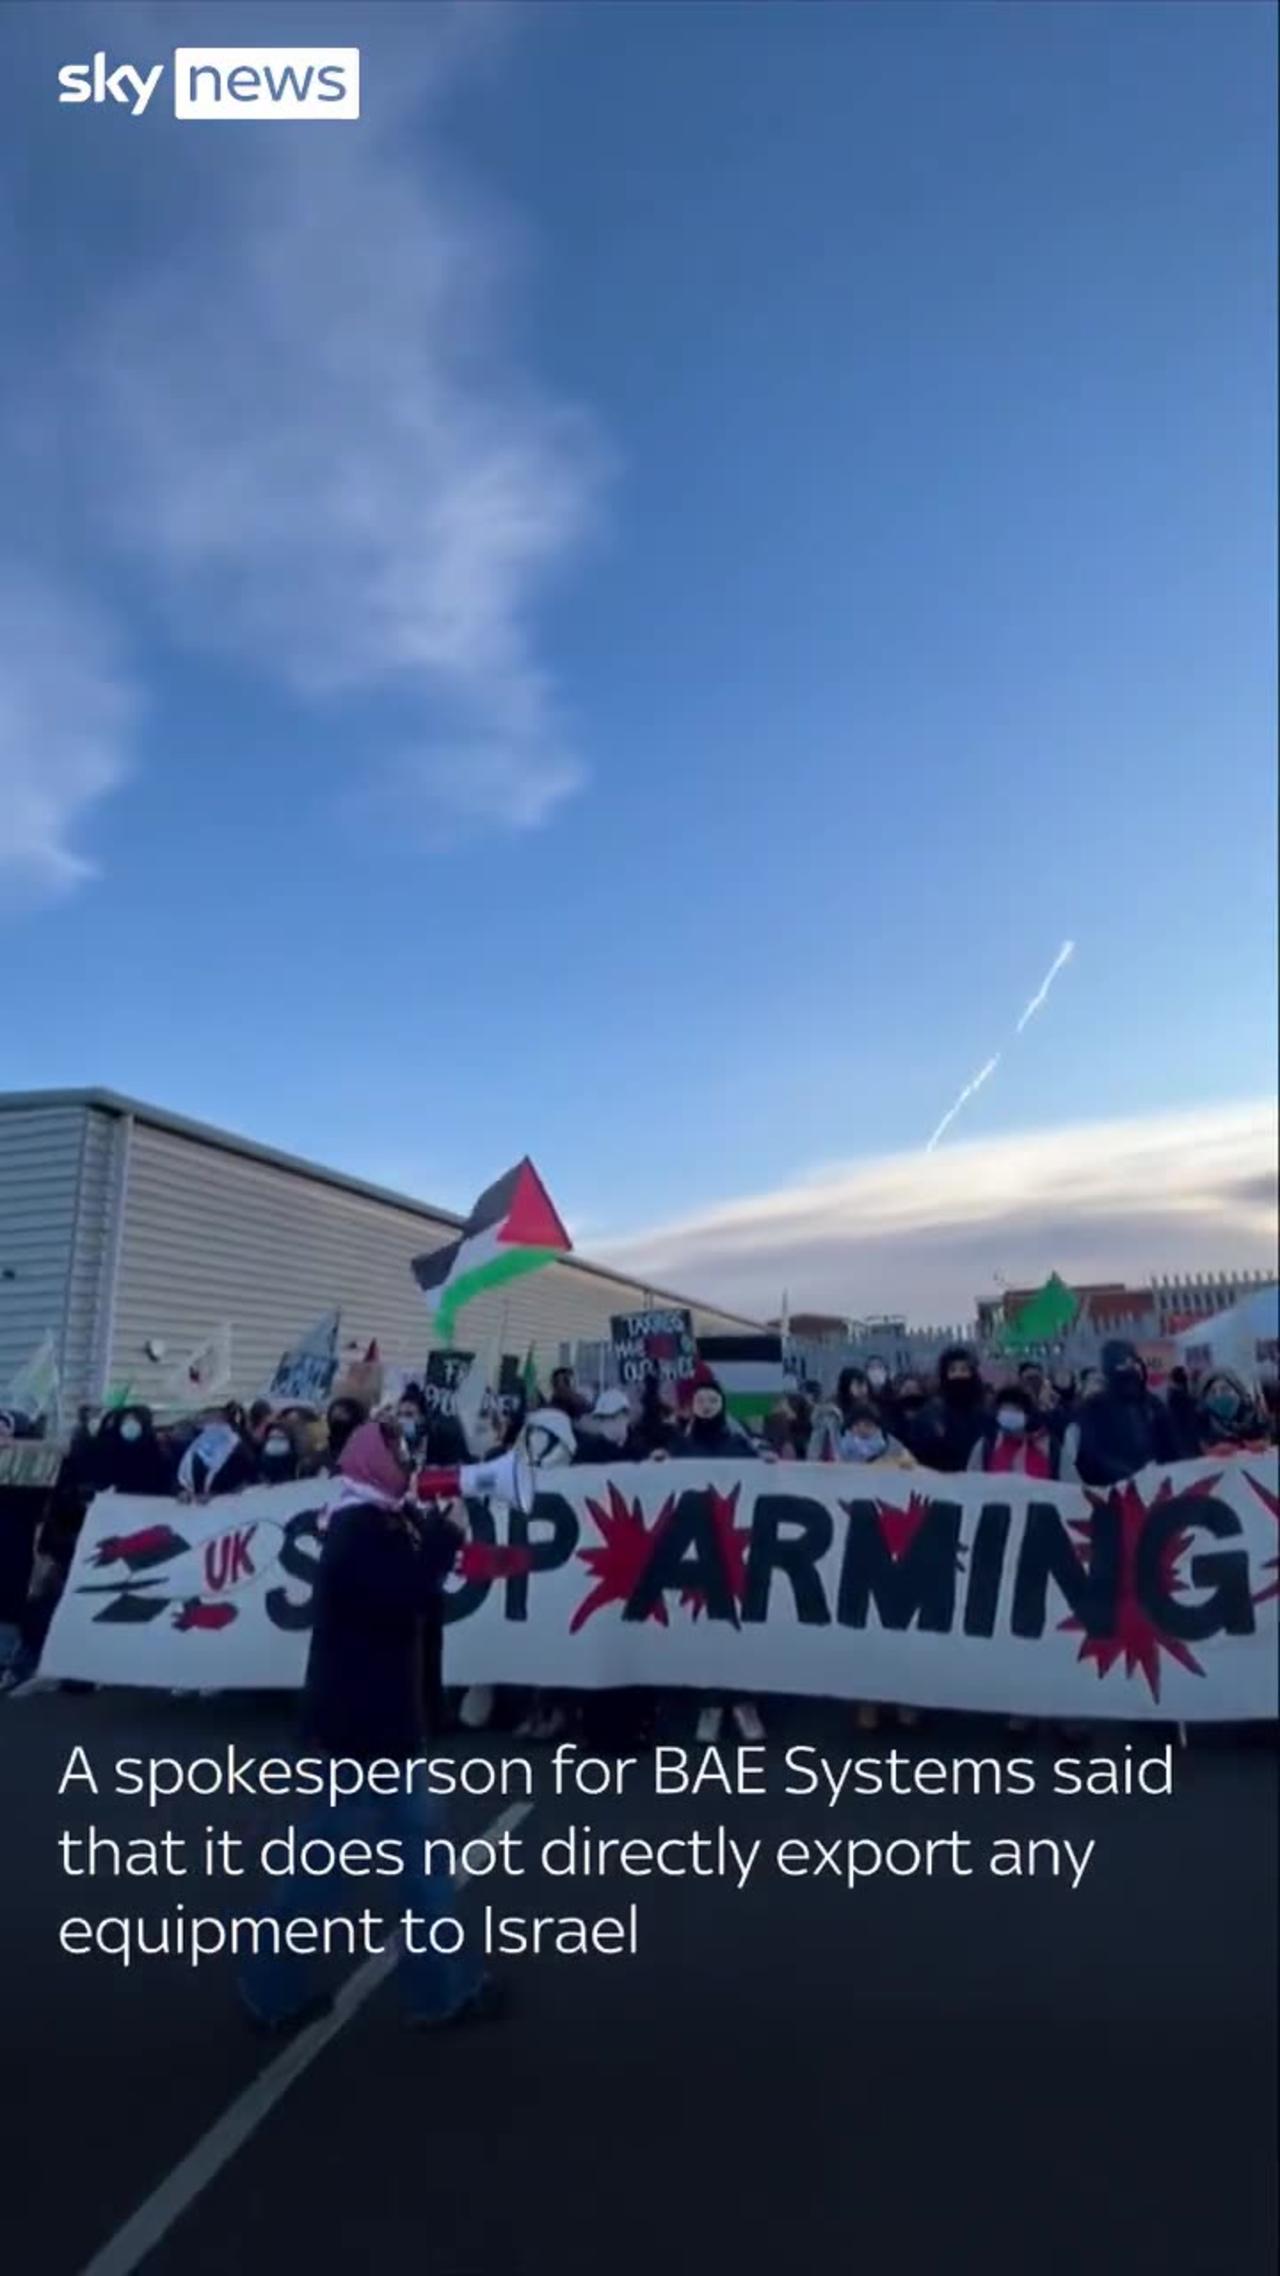 Pro-Palestinian demonstrators have blocked a Rochester factory owned by BAE Systems,